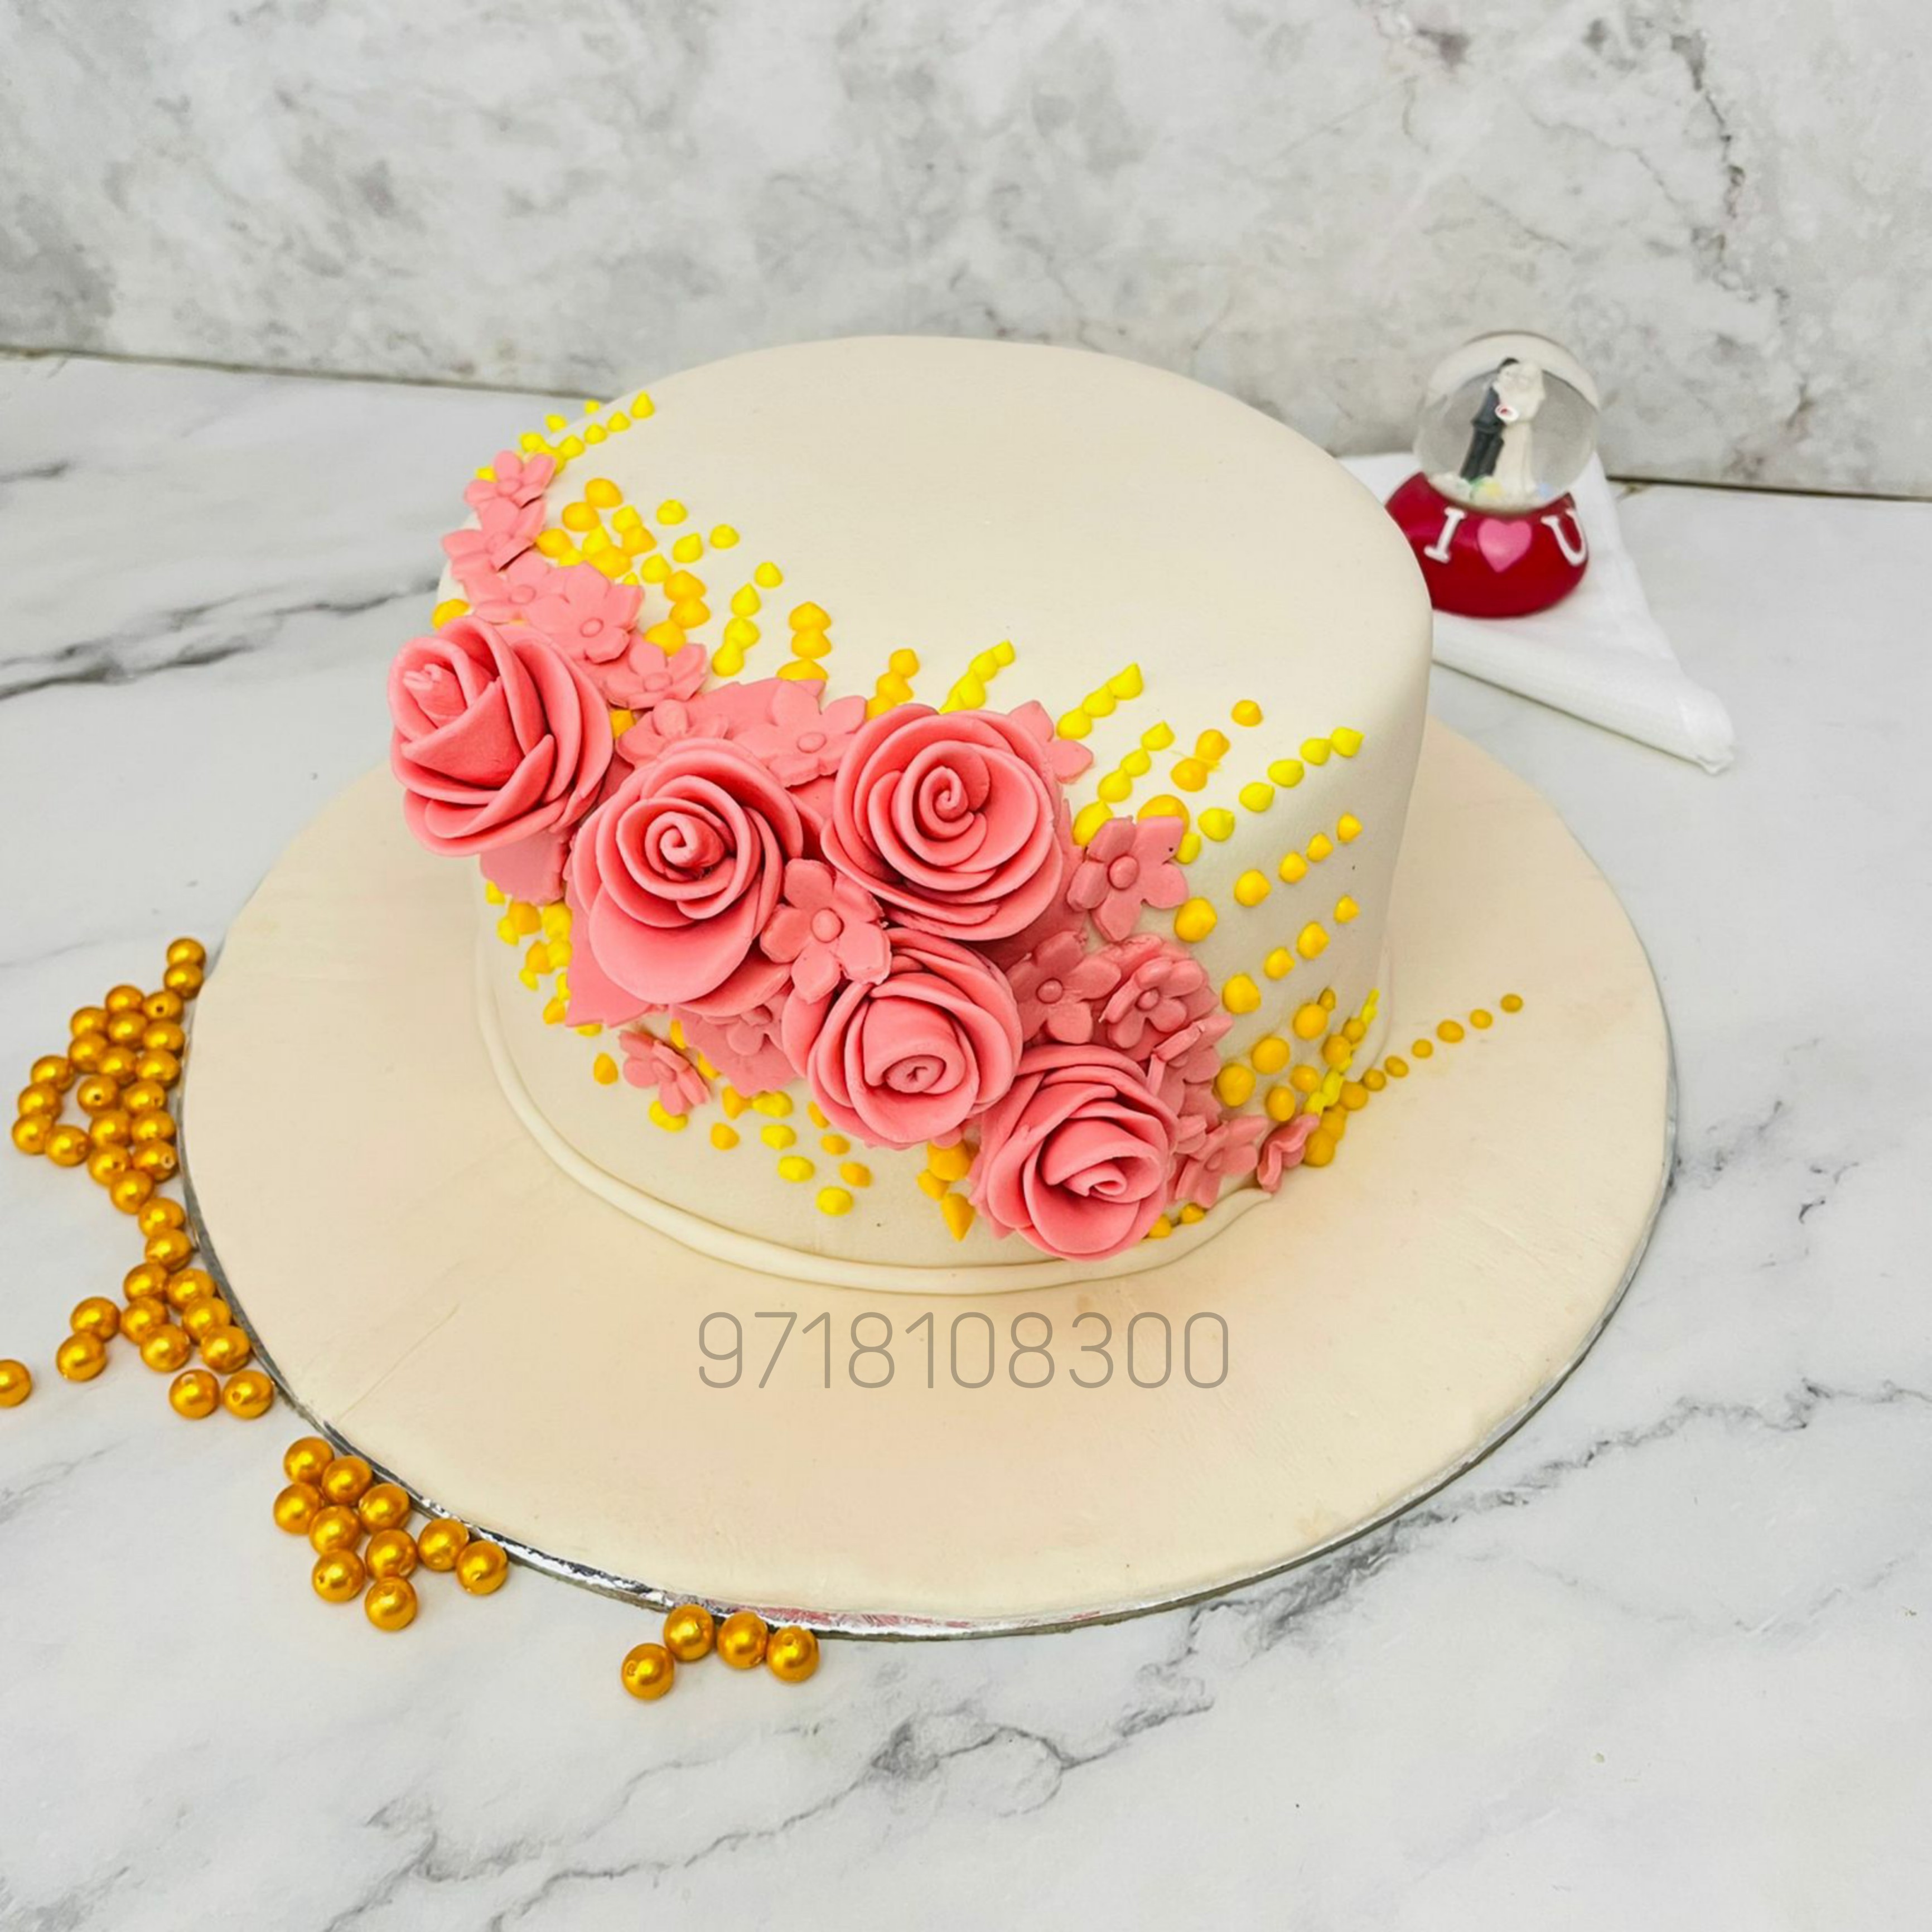 Lovely Pineapple Cake | Anniversary Cake | OrderYourChoice